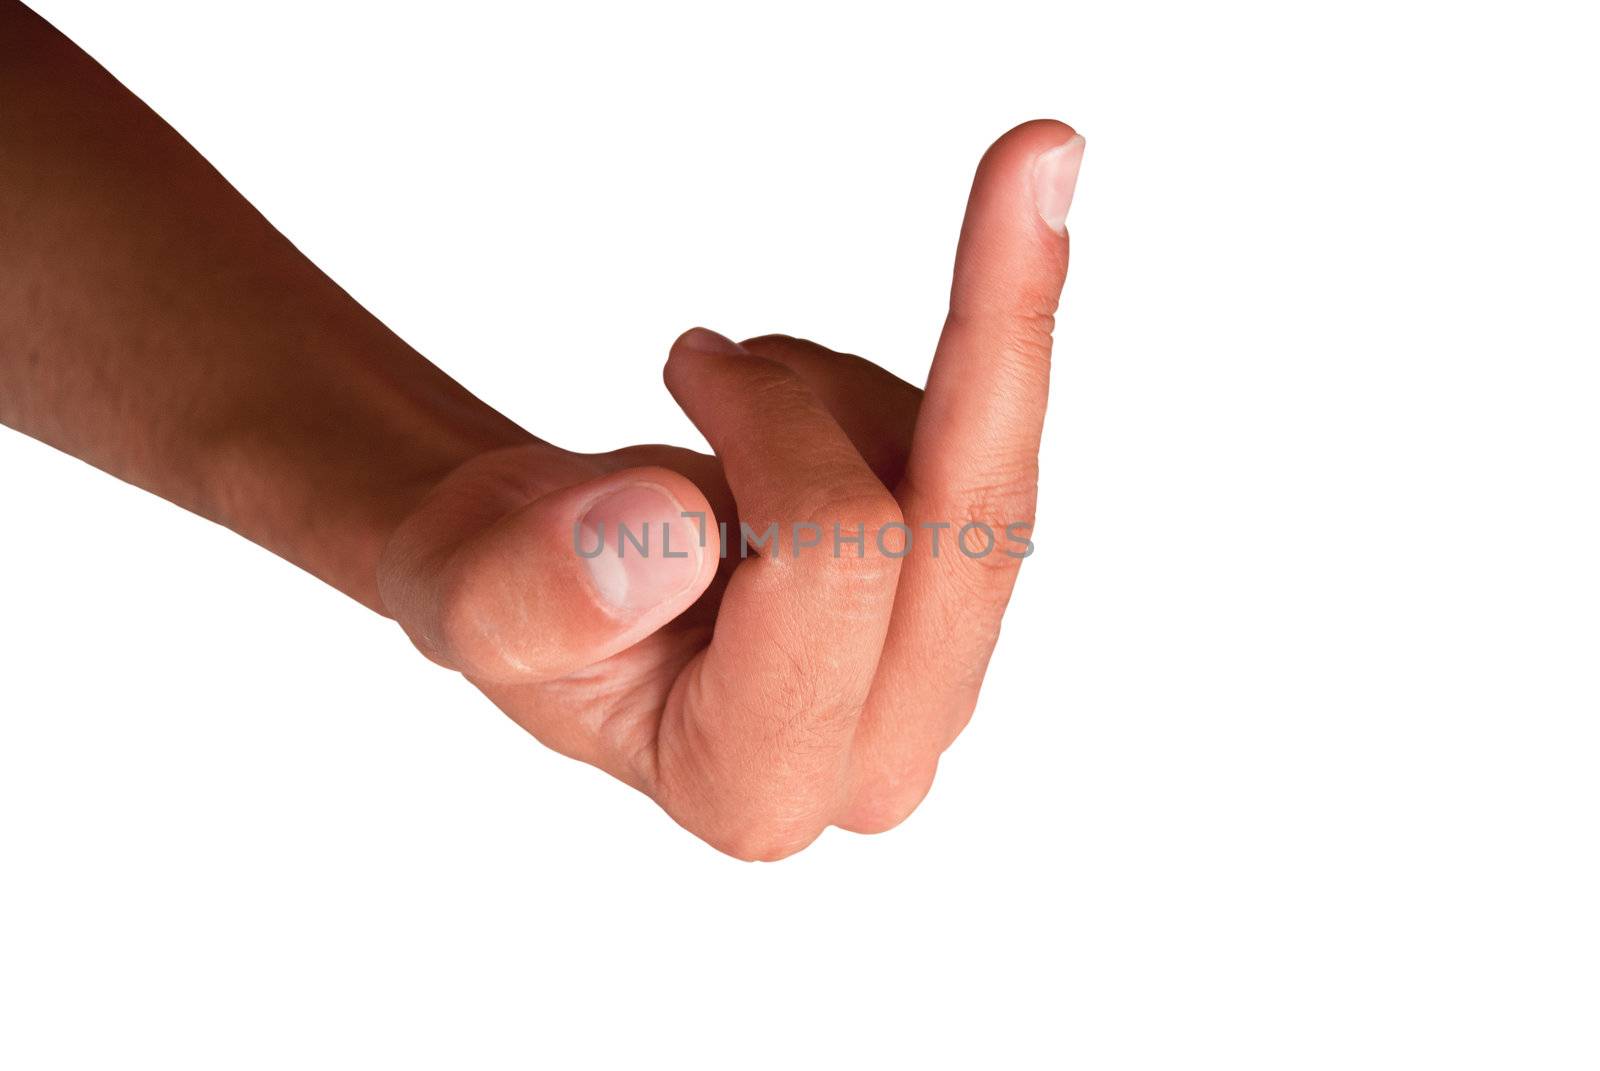 hand and finger pointing at / showing middle finger gesture